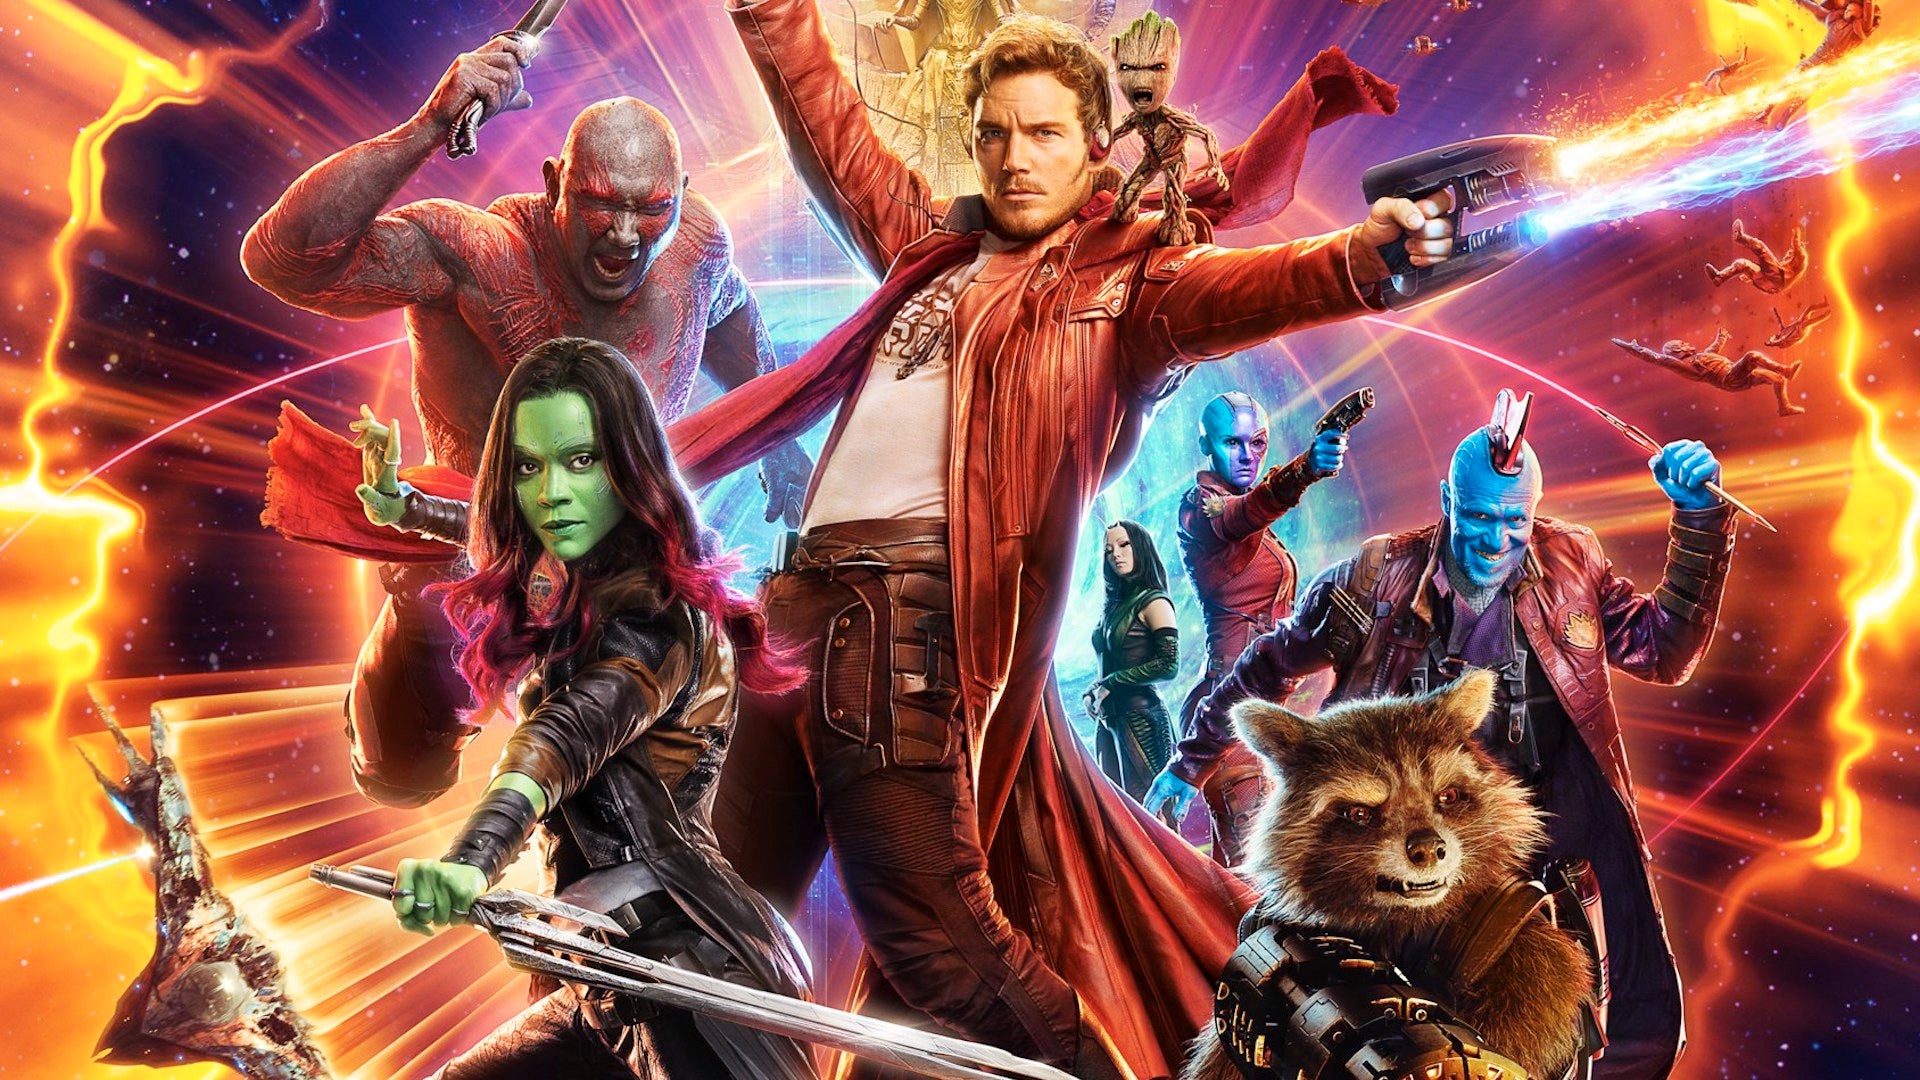 Marvel's Guardians of the Galaxy: 2-Movie Collection 4K